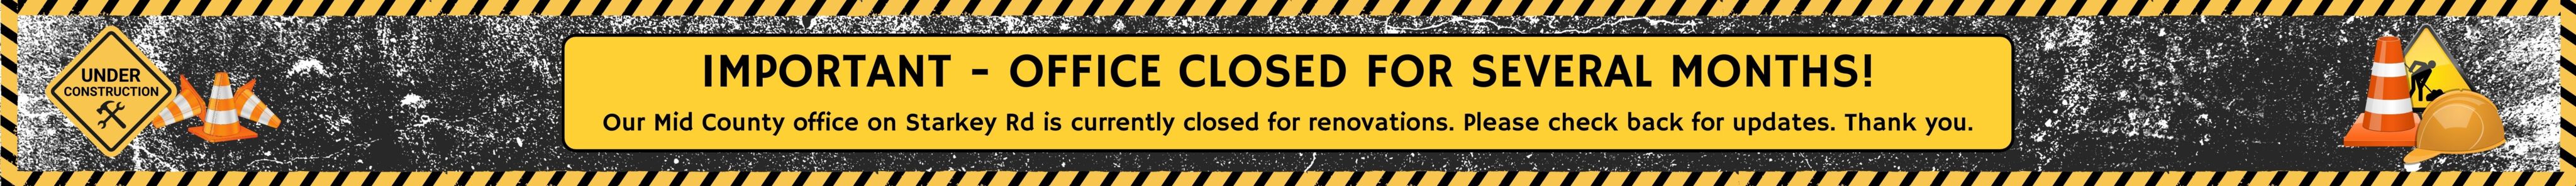 IMPORTANT - OFFICE CLOSED FOR SEVERAL MONTHS! Our Mid County office on Starkey Rd is currently closed for renovations. Please check back for updates. Thank you.